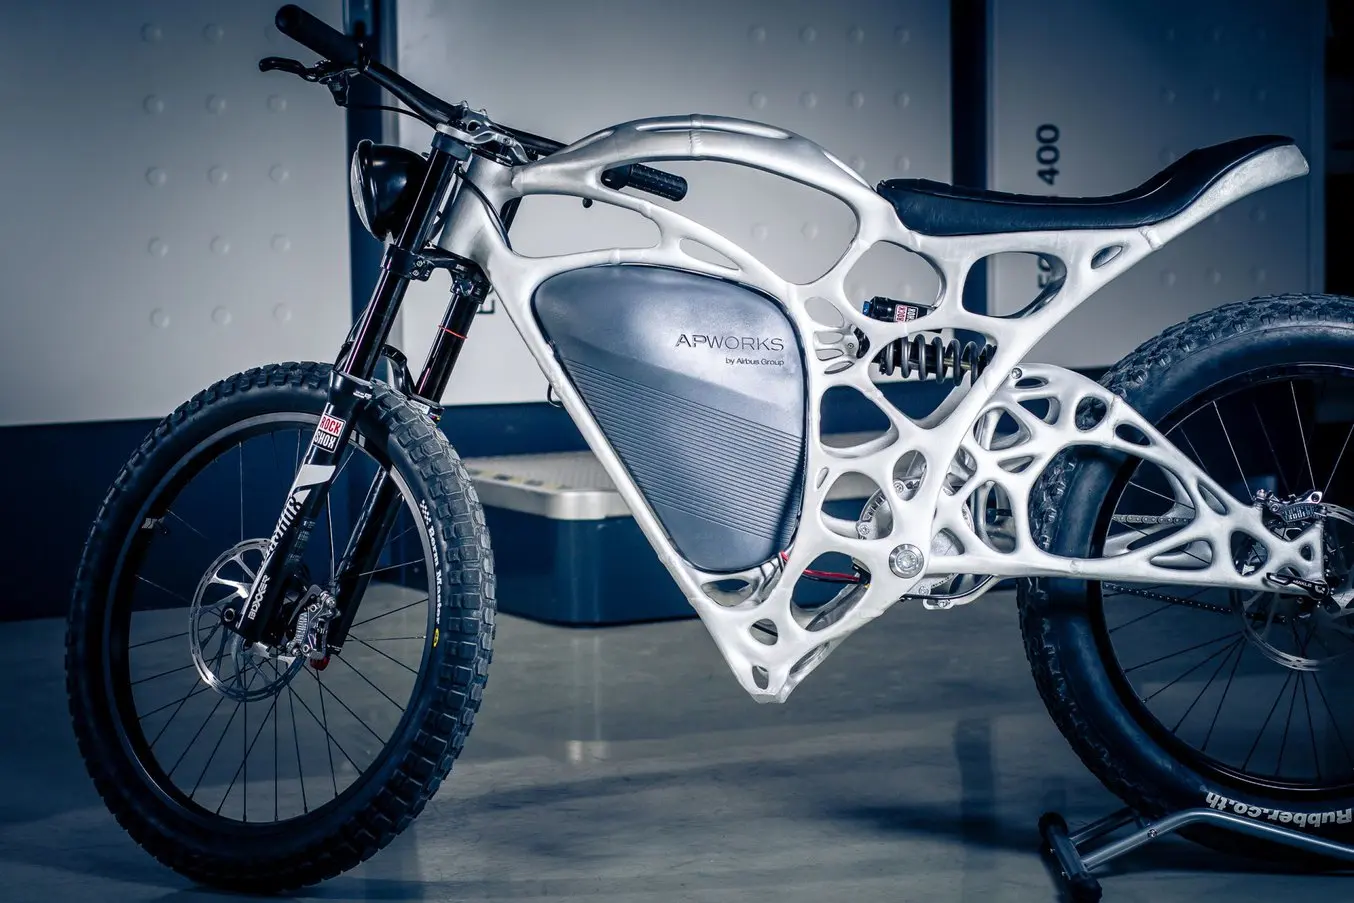 motorcycle made with generative design